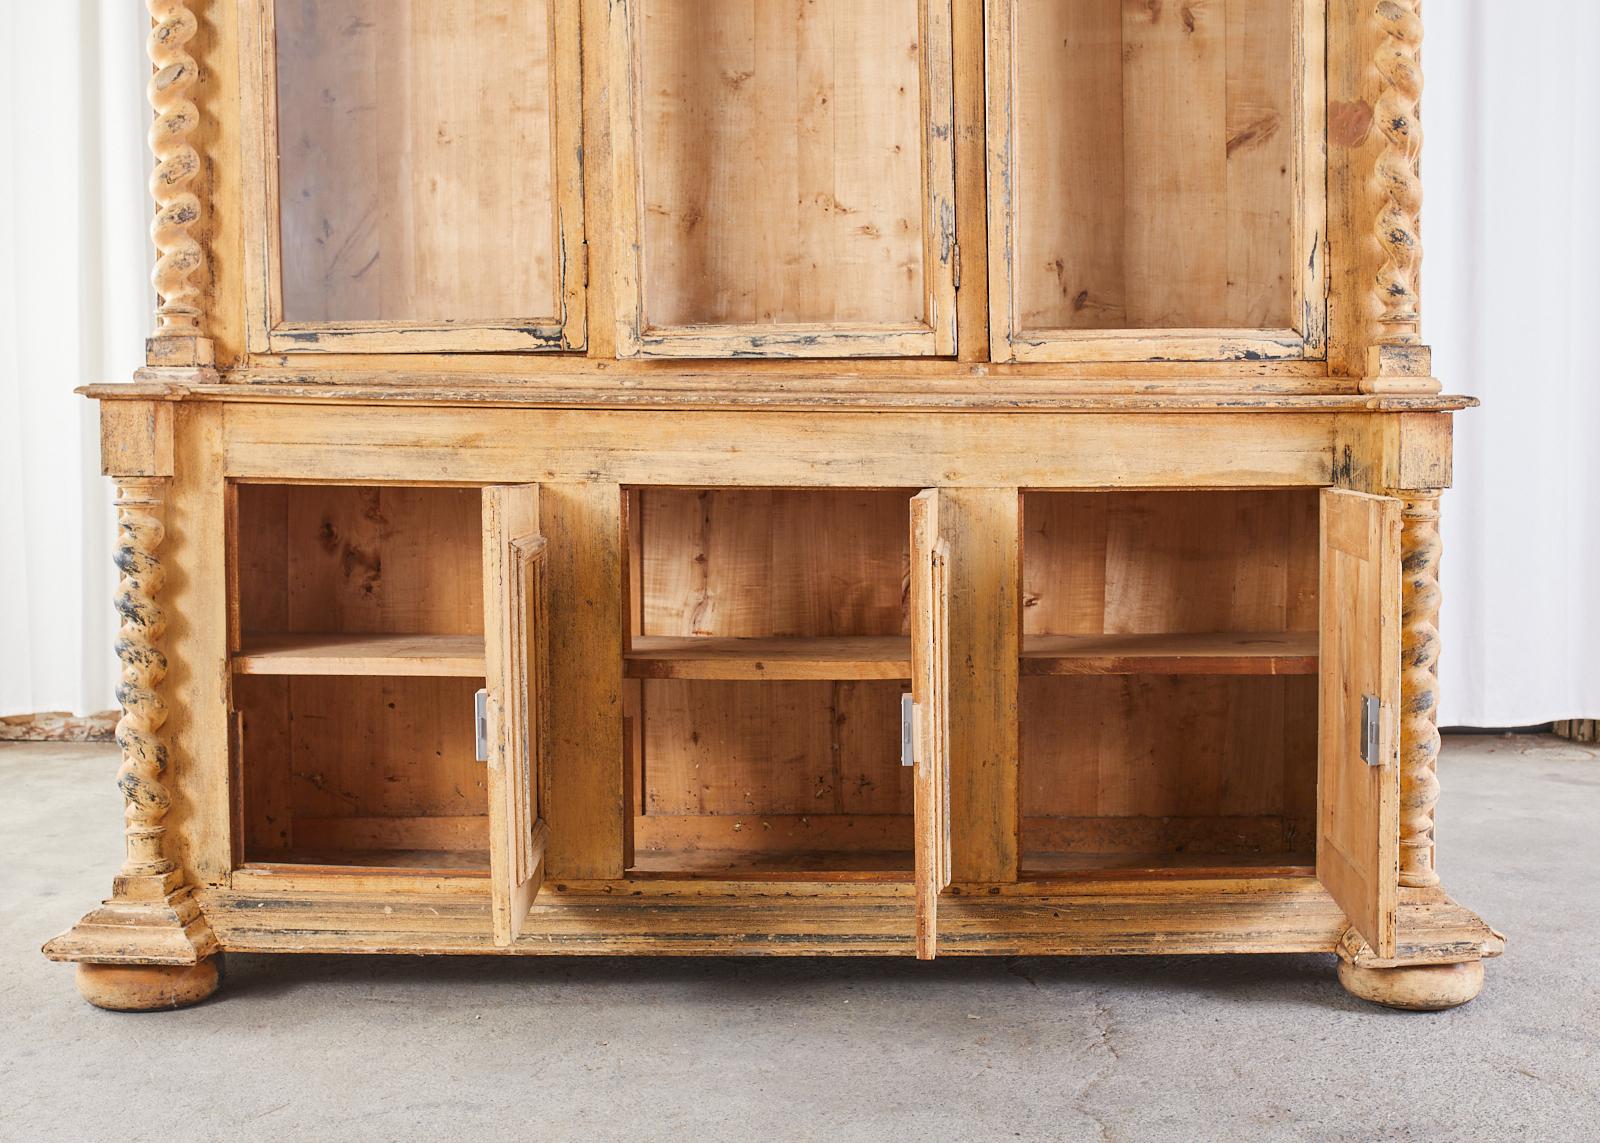 Rustic 19th Century Country French Pine Barley Twist Bibliotheque Bookcase